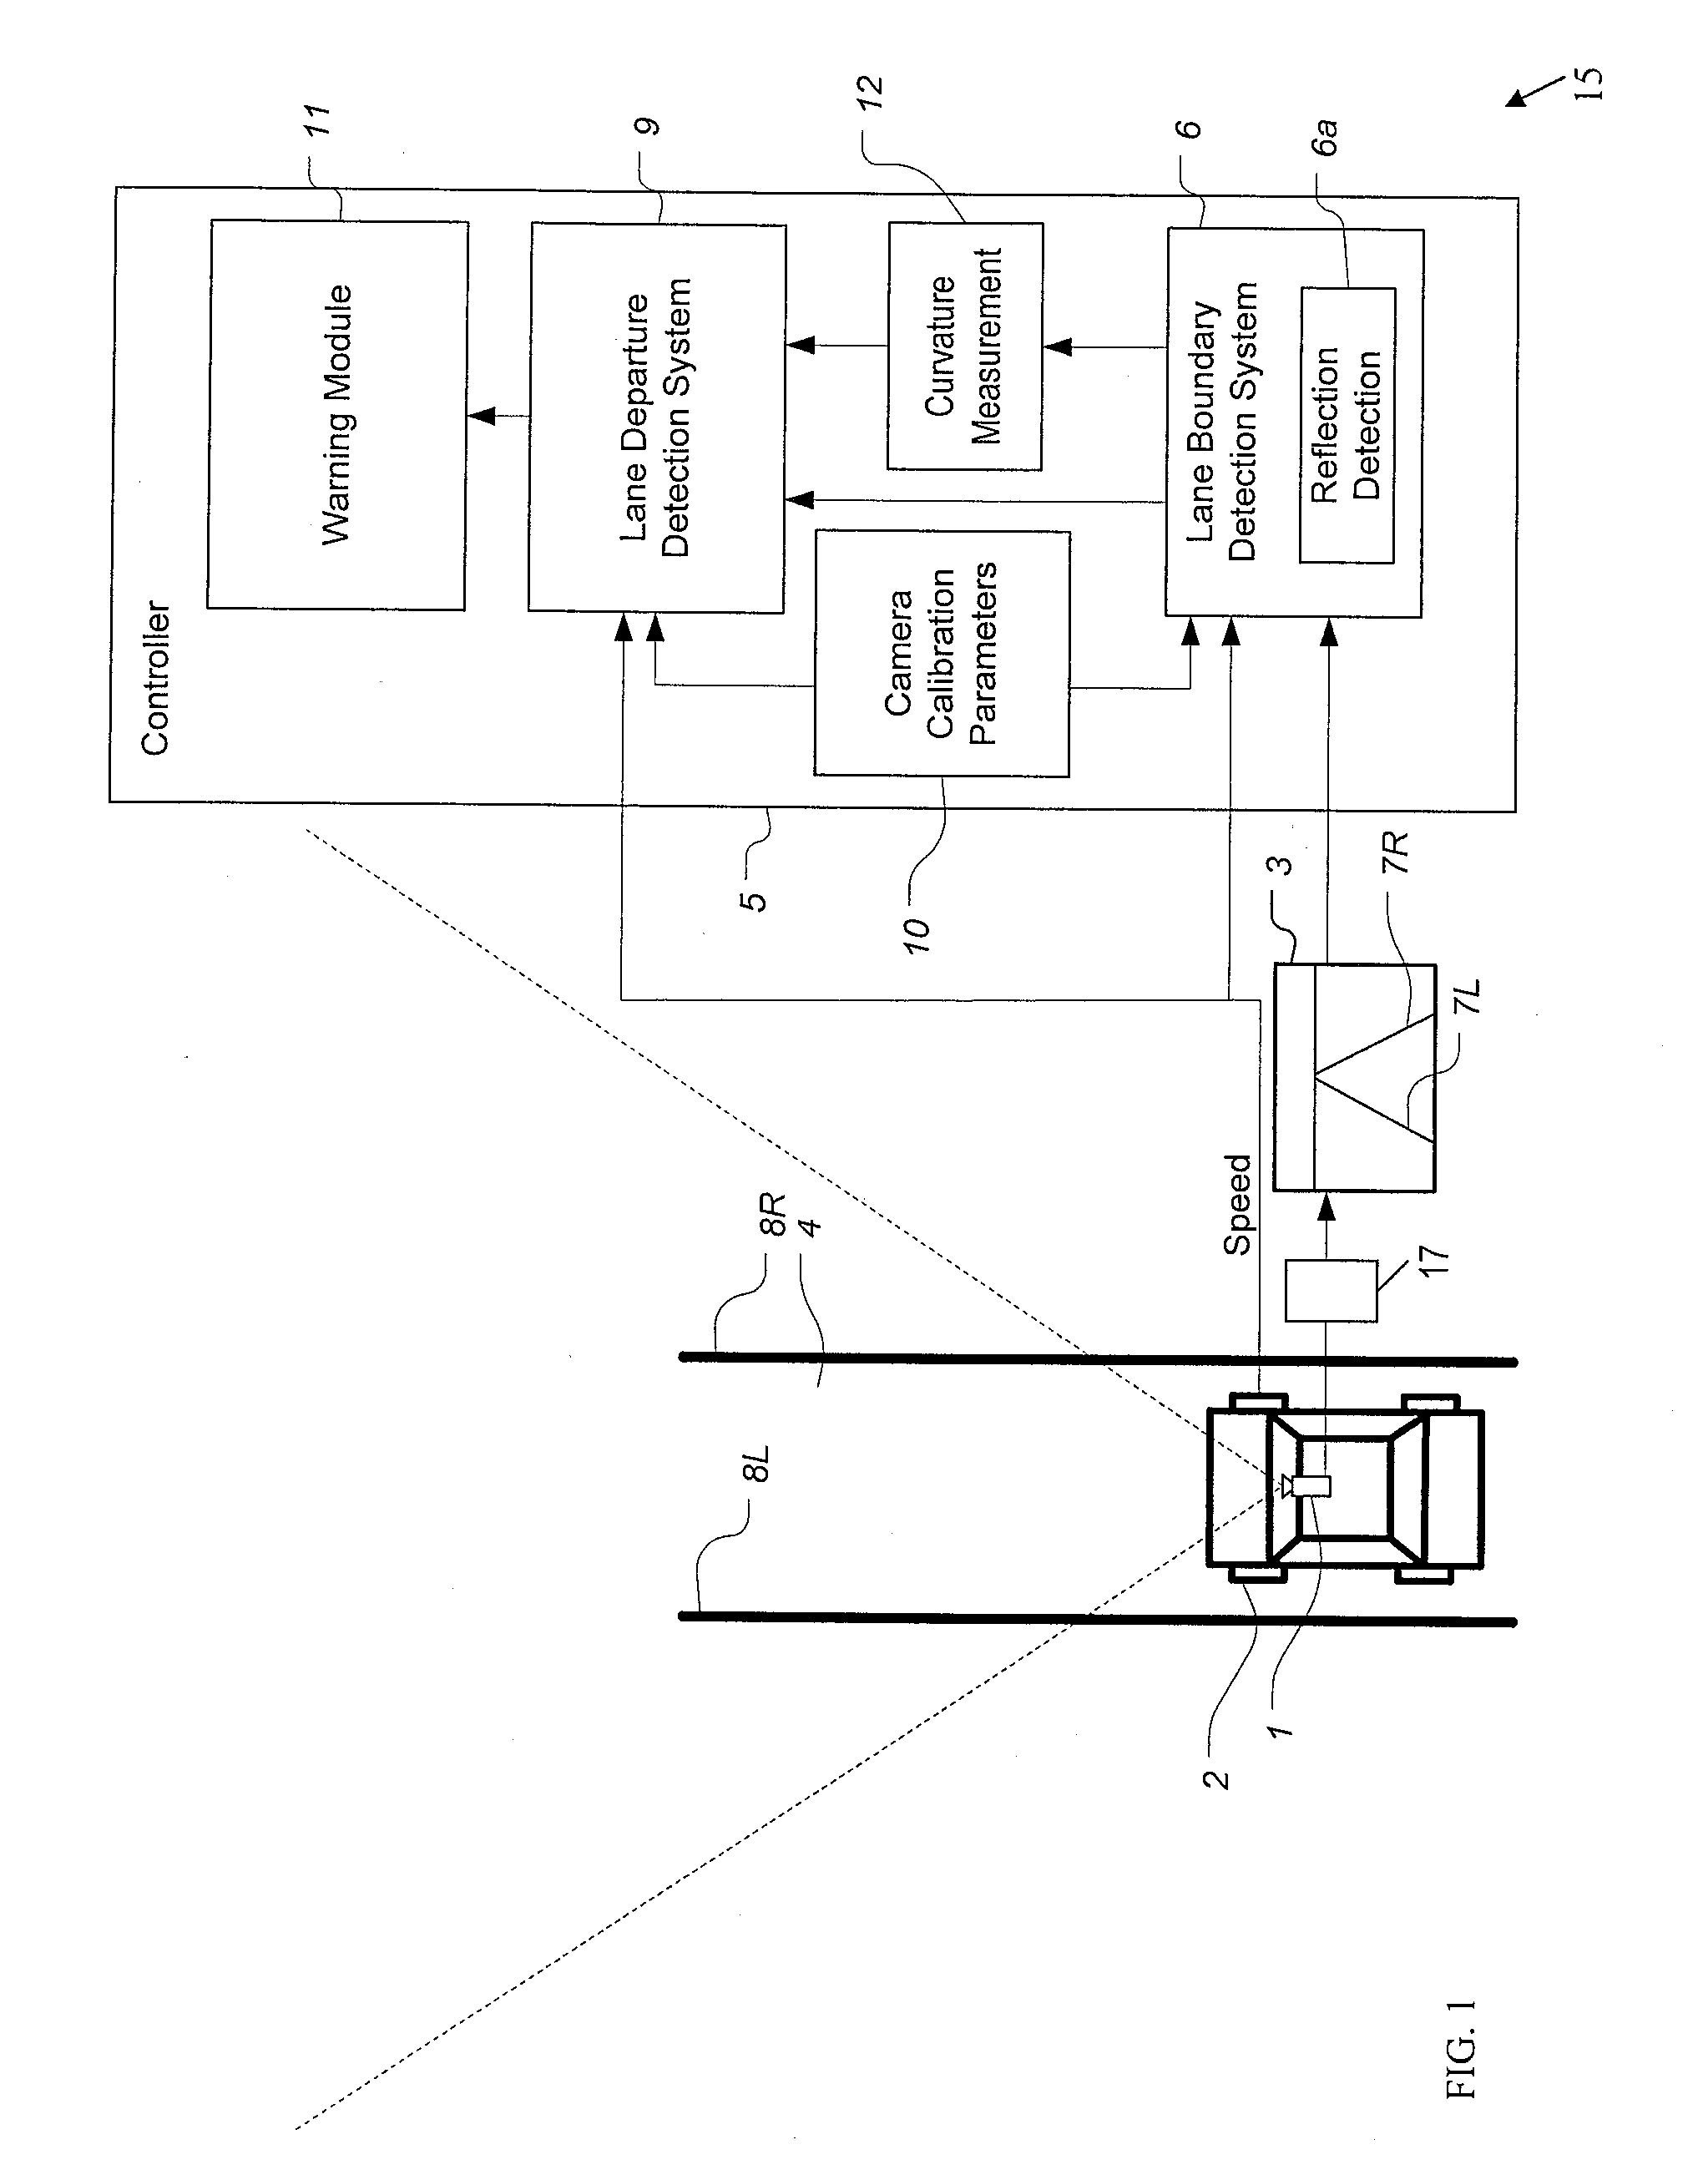 Method and system for video-based road characterization, lane detection and departure prevention